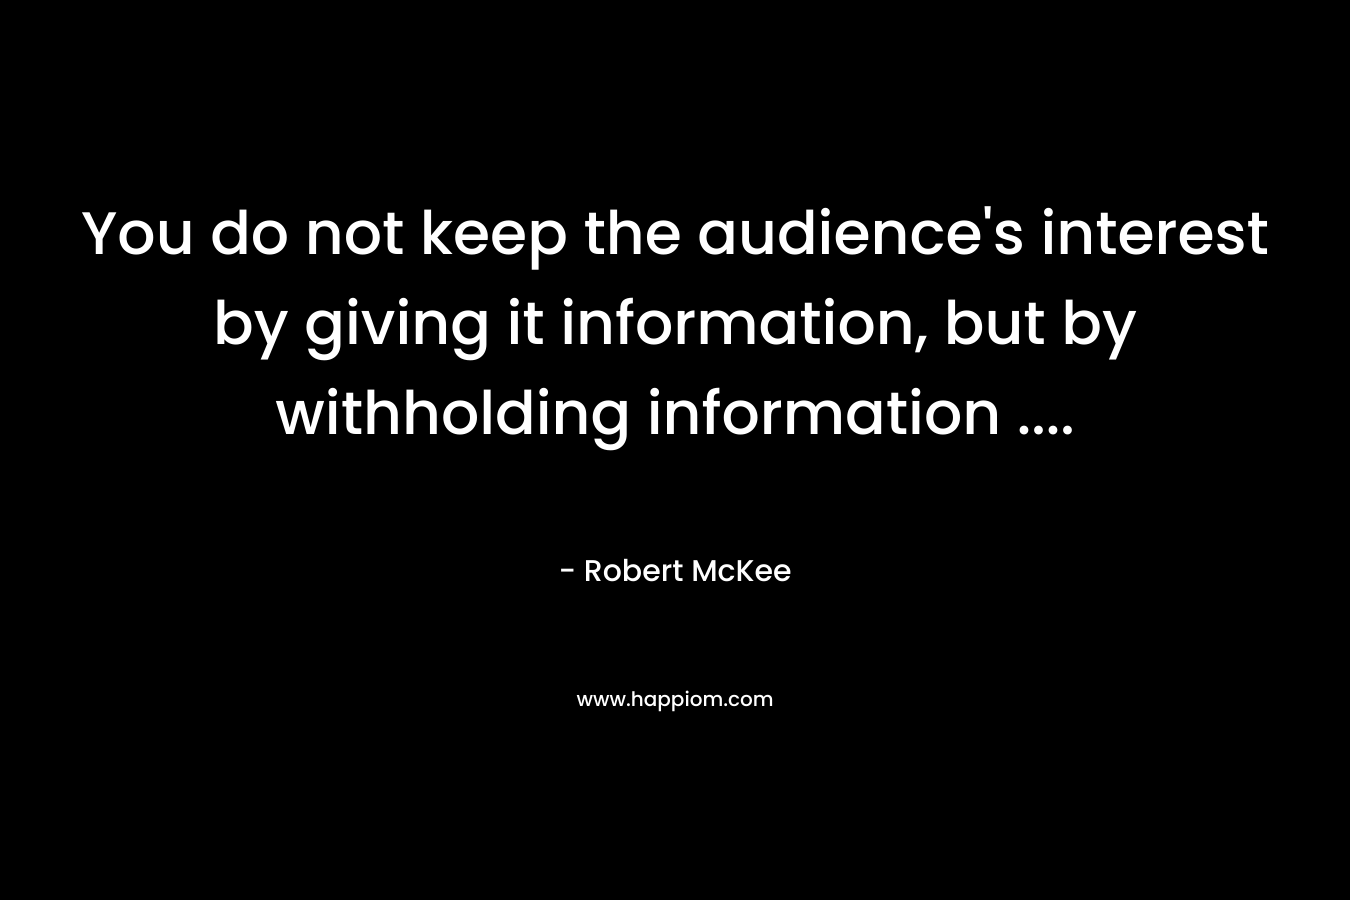 You do not keep the audience's interest by giving it information, but by withholding information ....